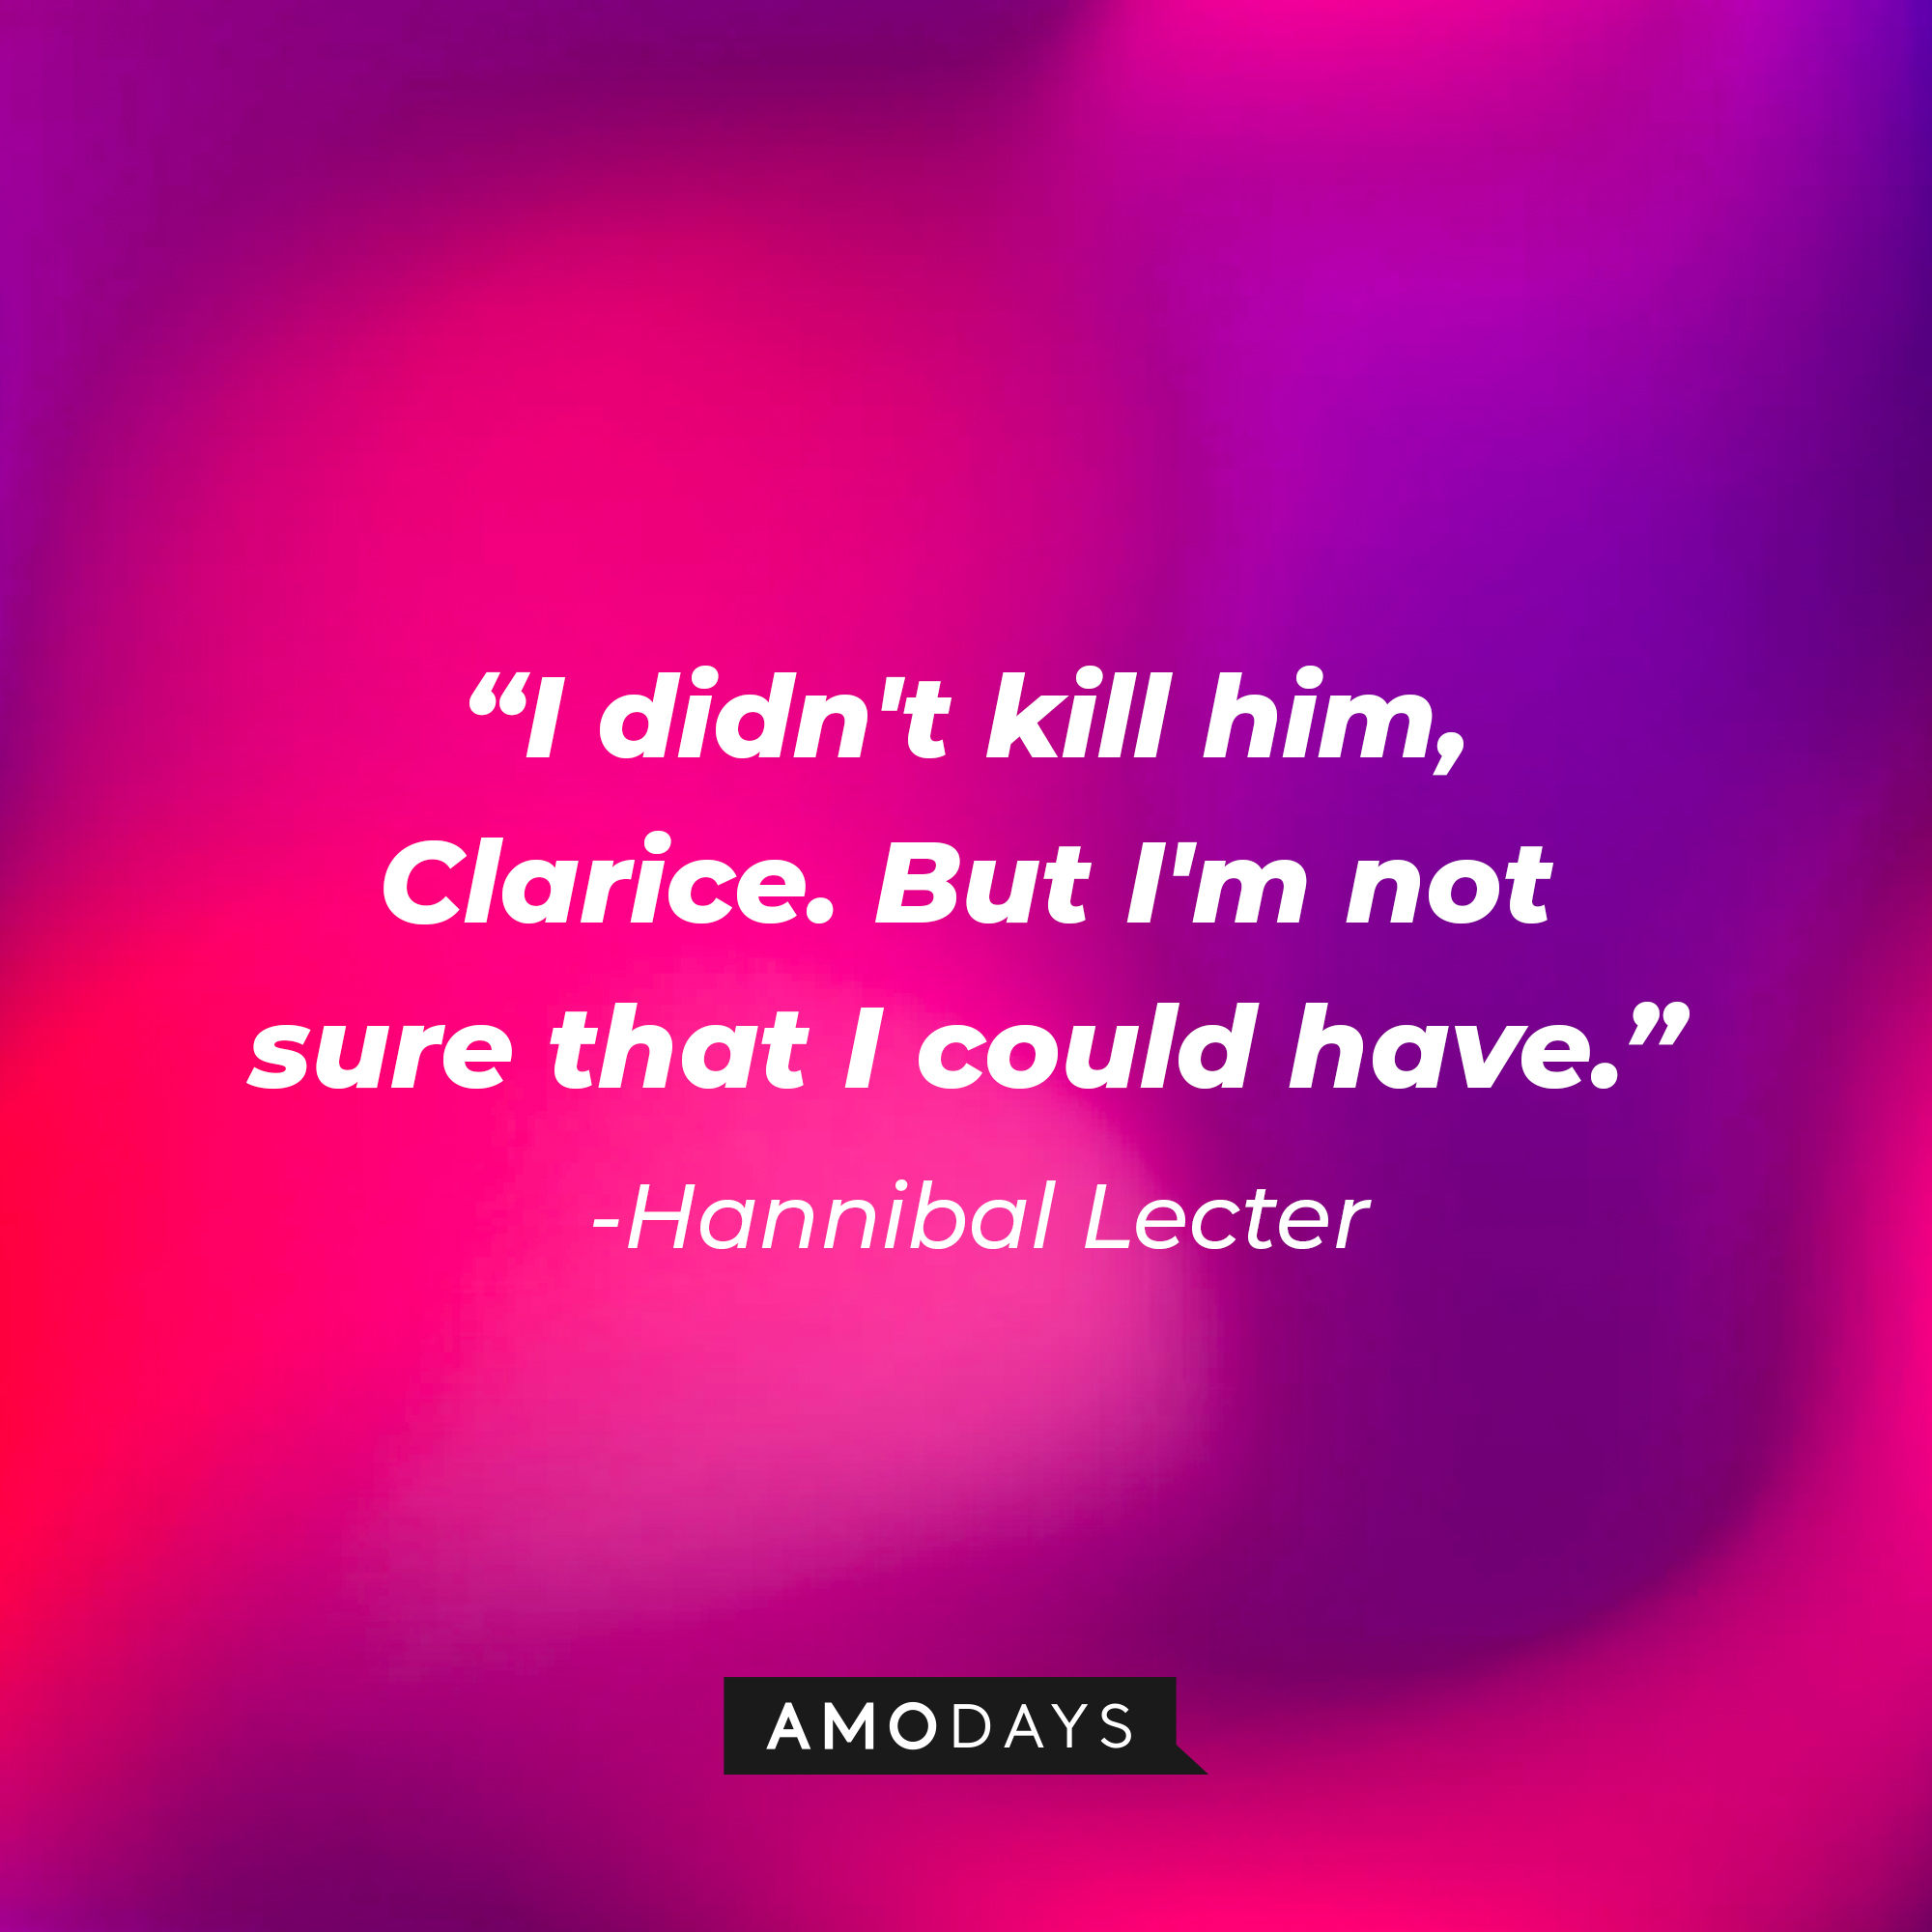 Hannibal Lecter's quote from "The Silence of the Lambs:" "I didn't kill him, Clarice. But I'm not sure that I could have." | Source: AmoDays